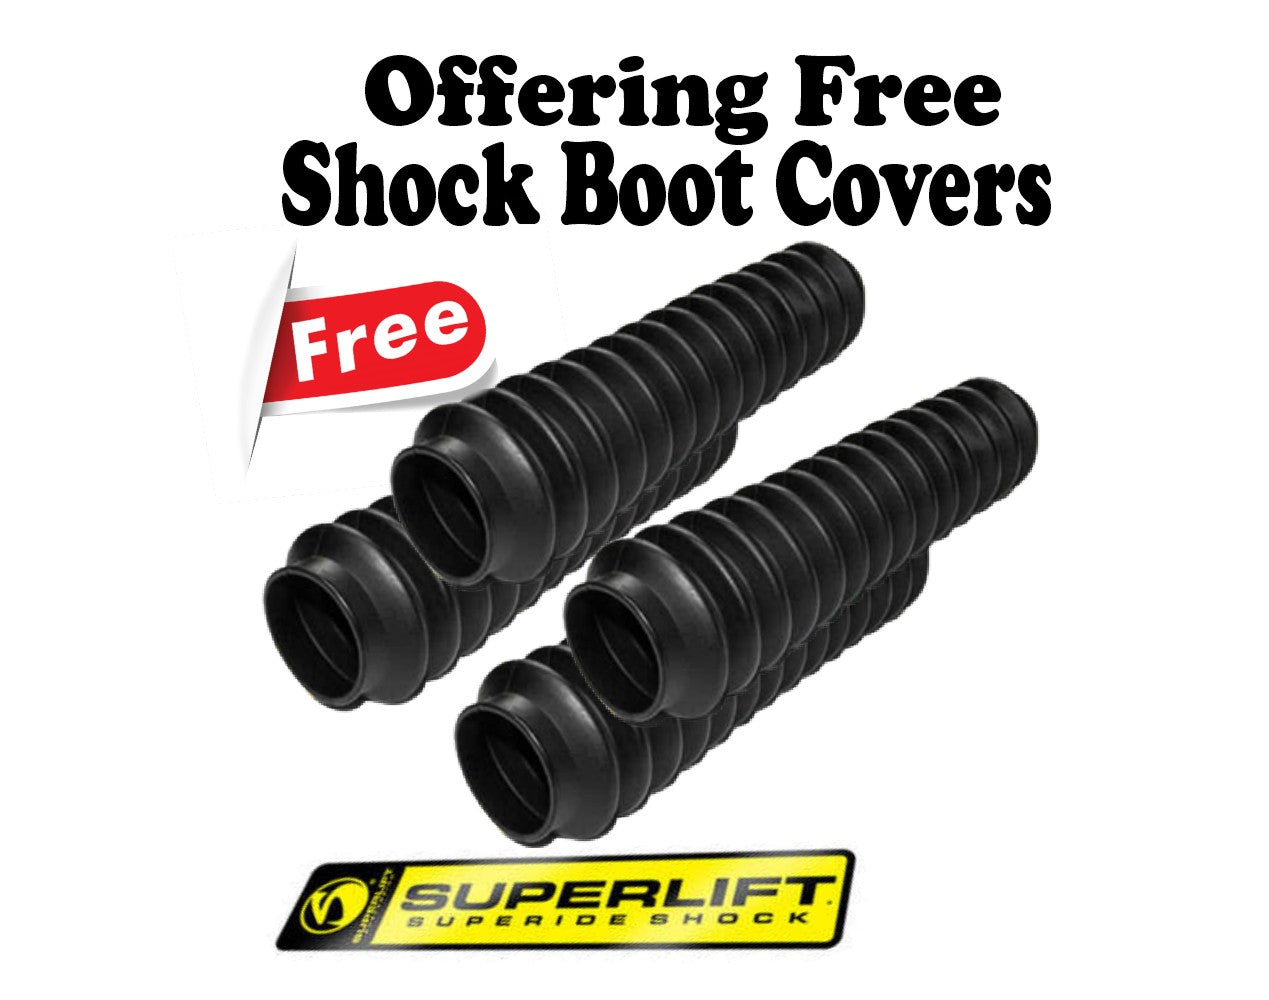 Superlift 2008-2010 Ford F-250 F-350 Super Duty Diesel 4 inch Suspension Lift Kit With Fox 2.0 Shocks Without 4 Link Conversion 4WD K854FX